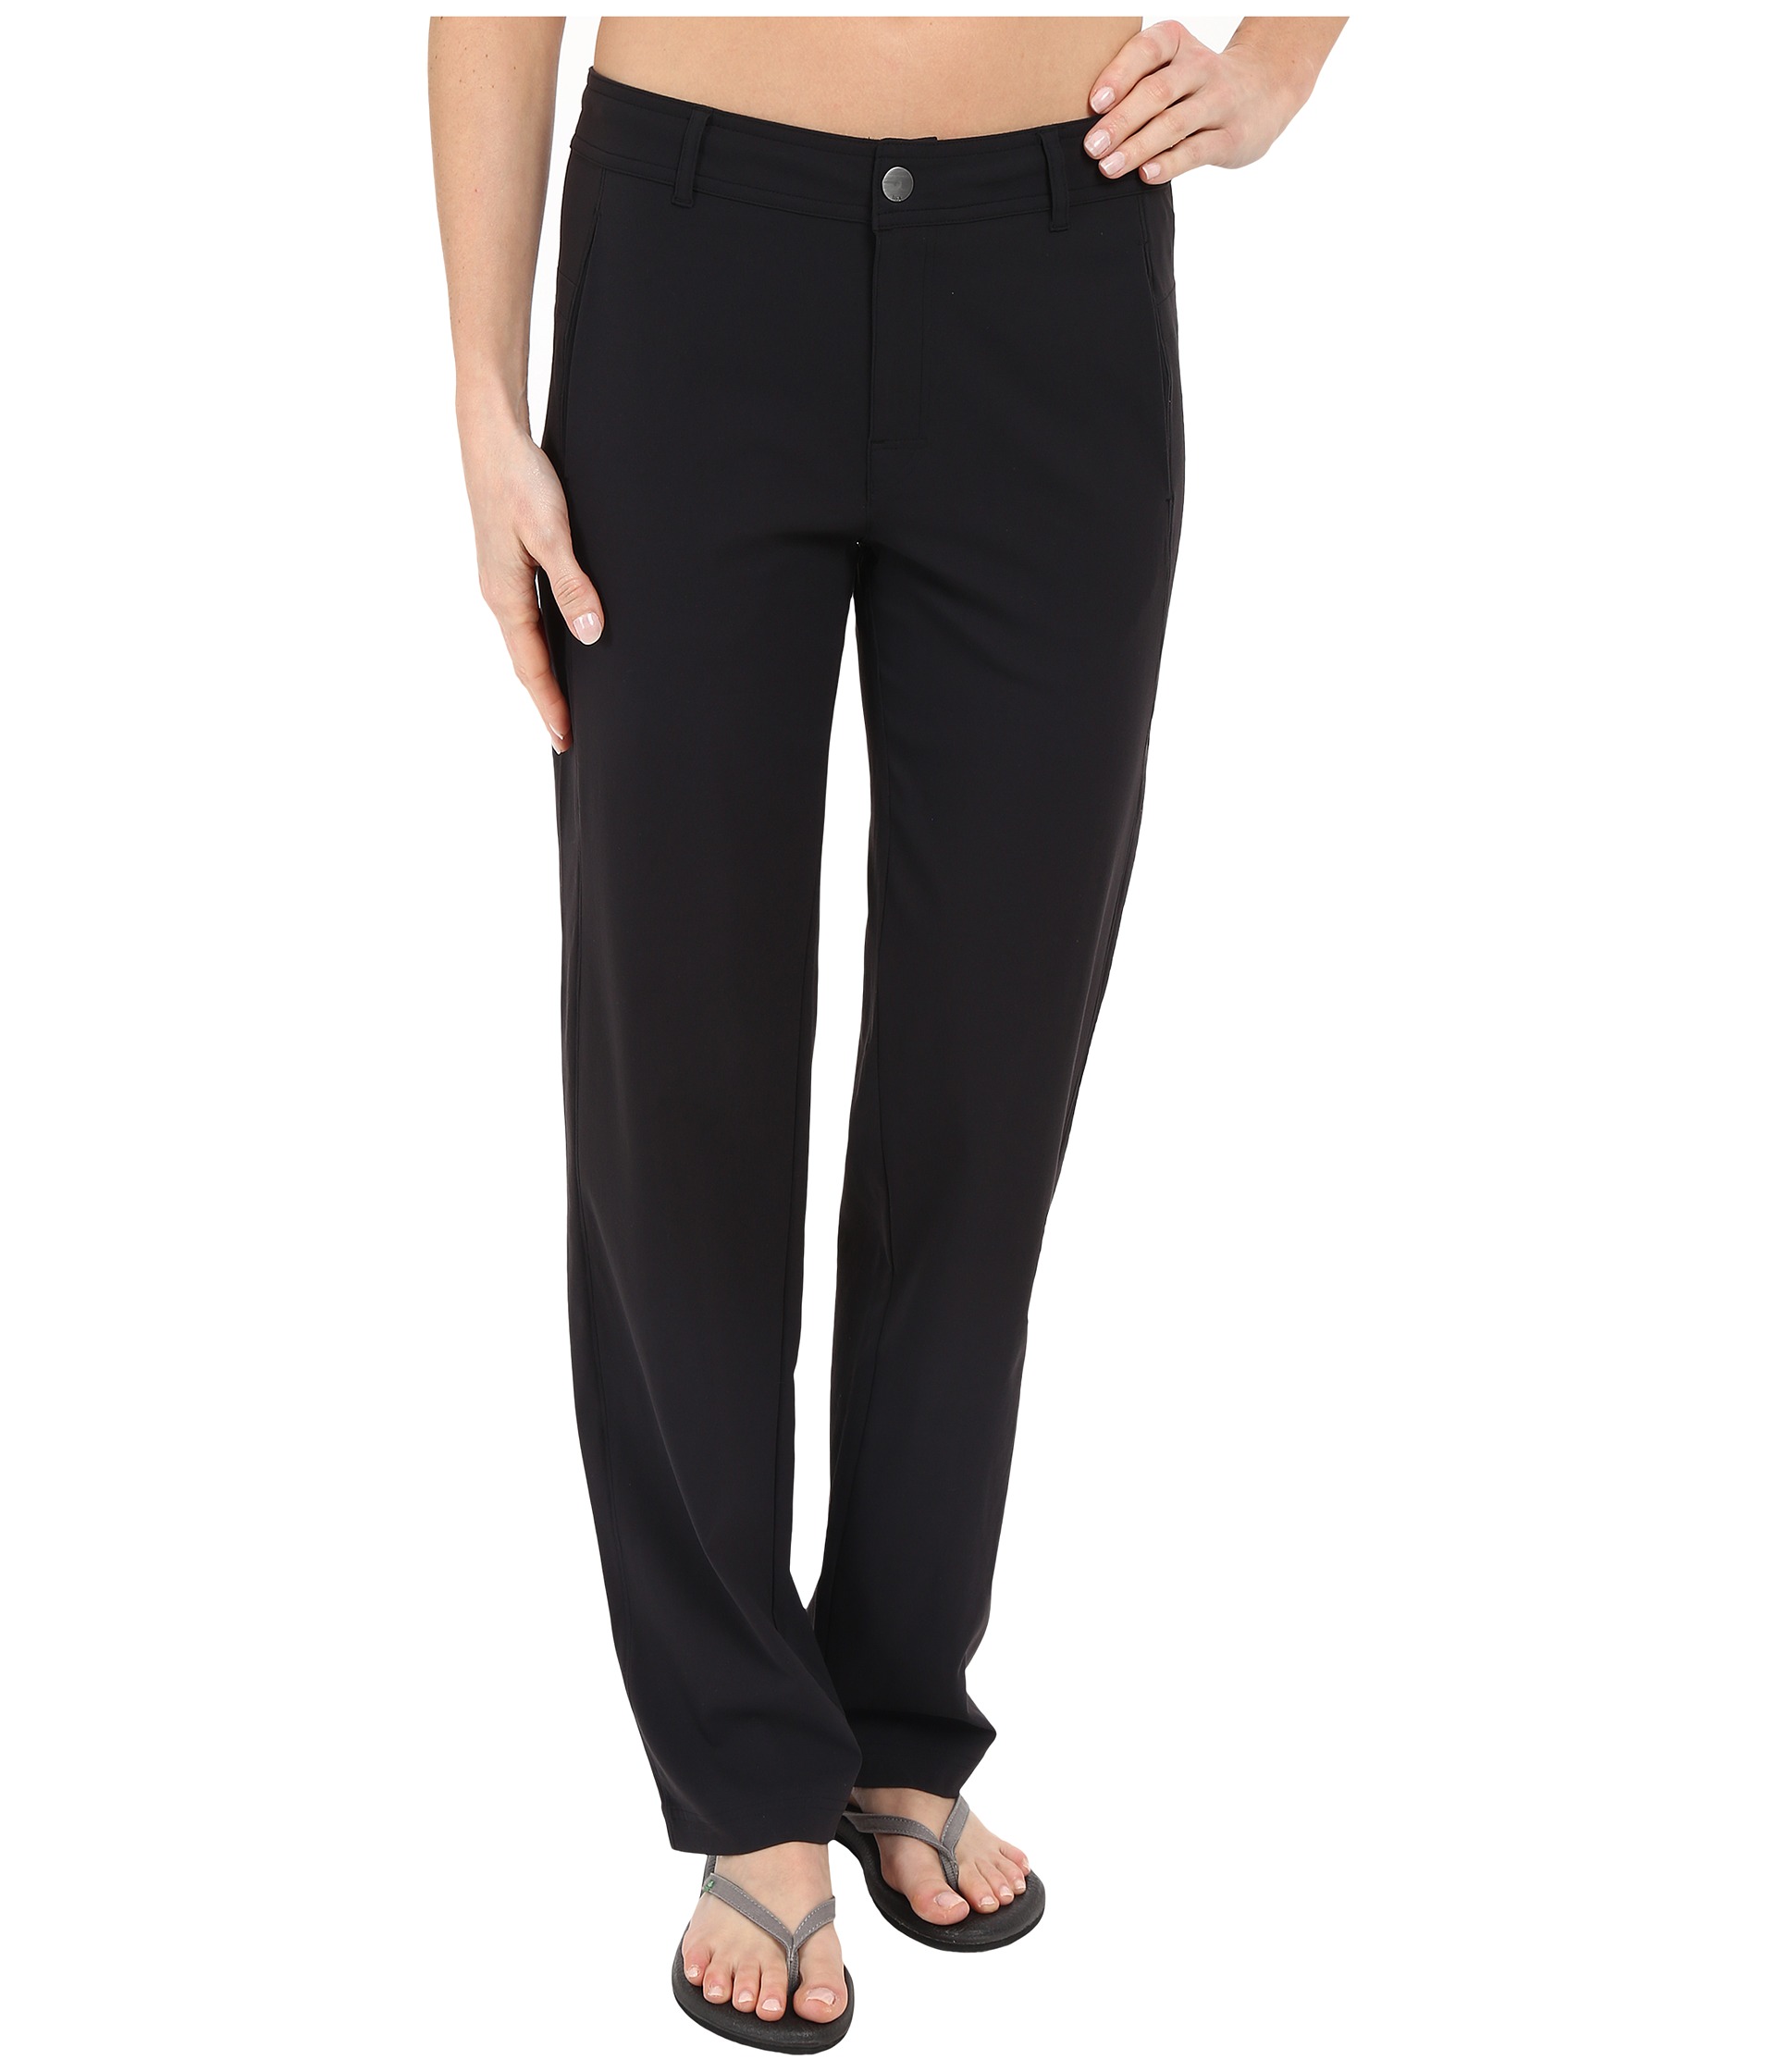 Lucy Walkabout Pants Lucy Black - Zappos.com Free Shipping BOTH Ways